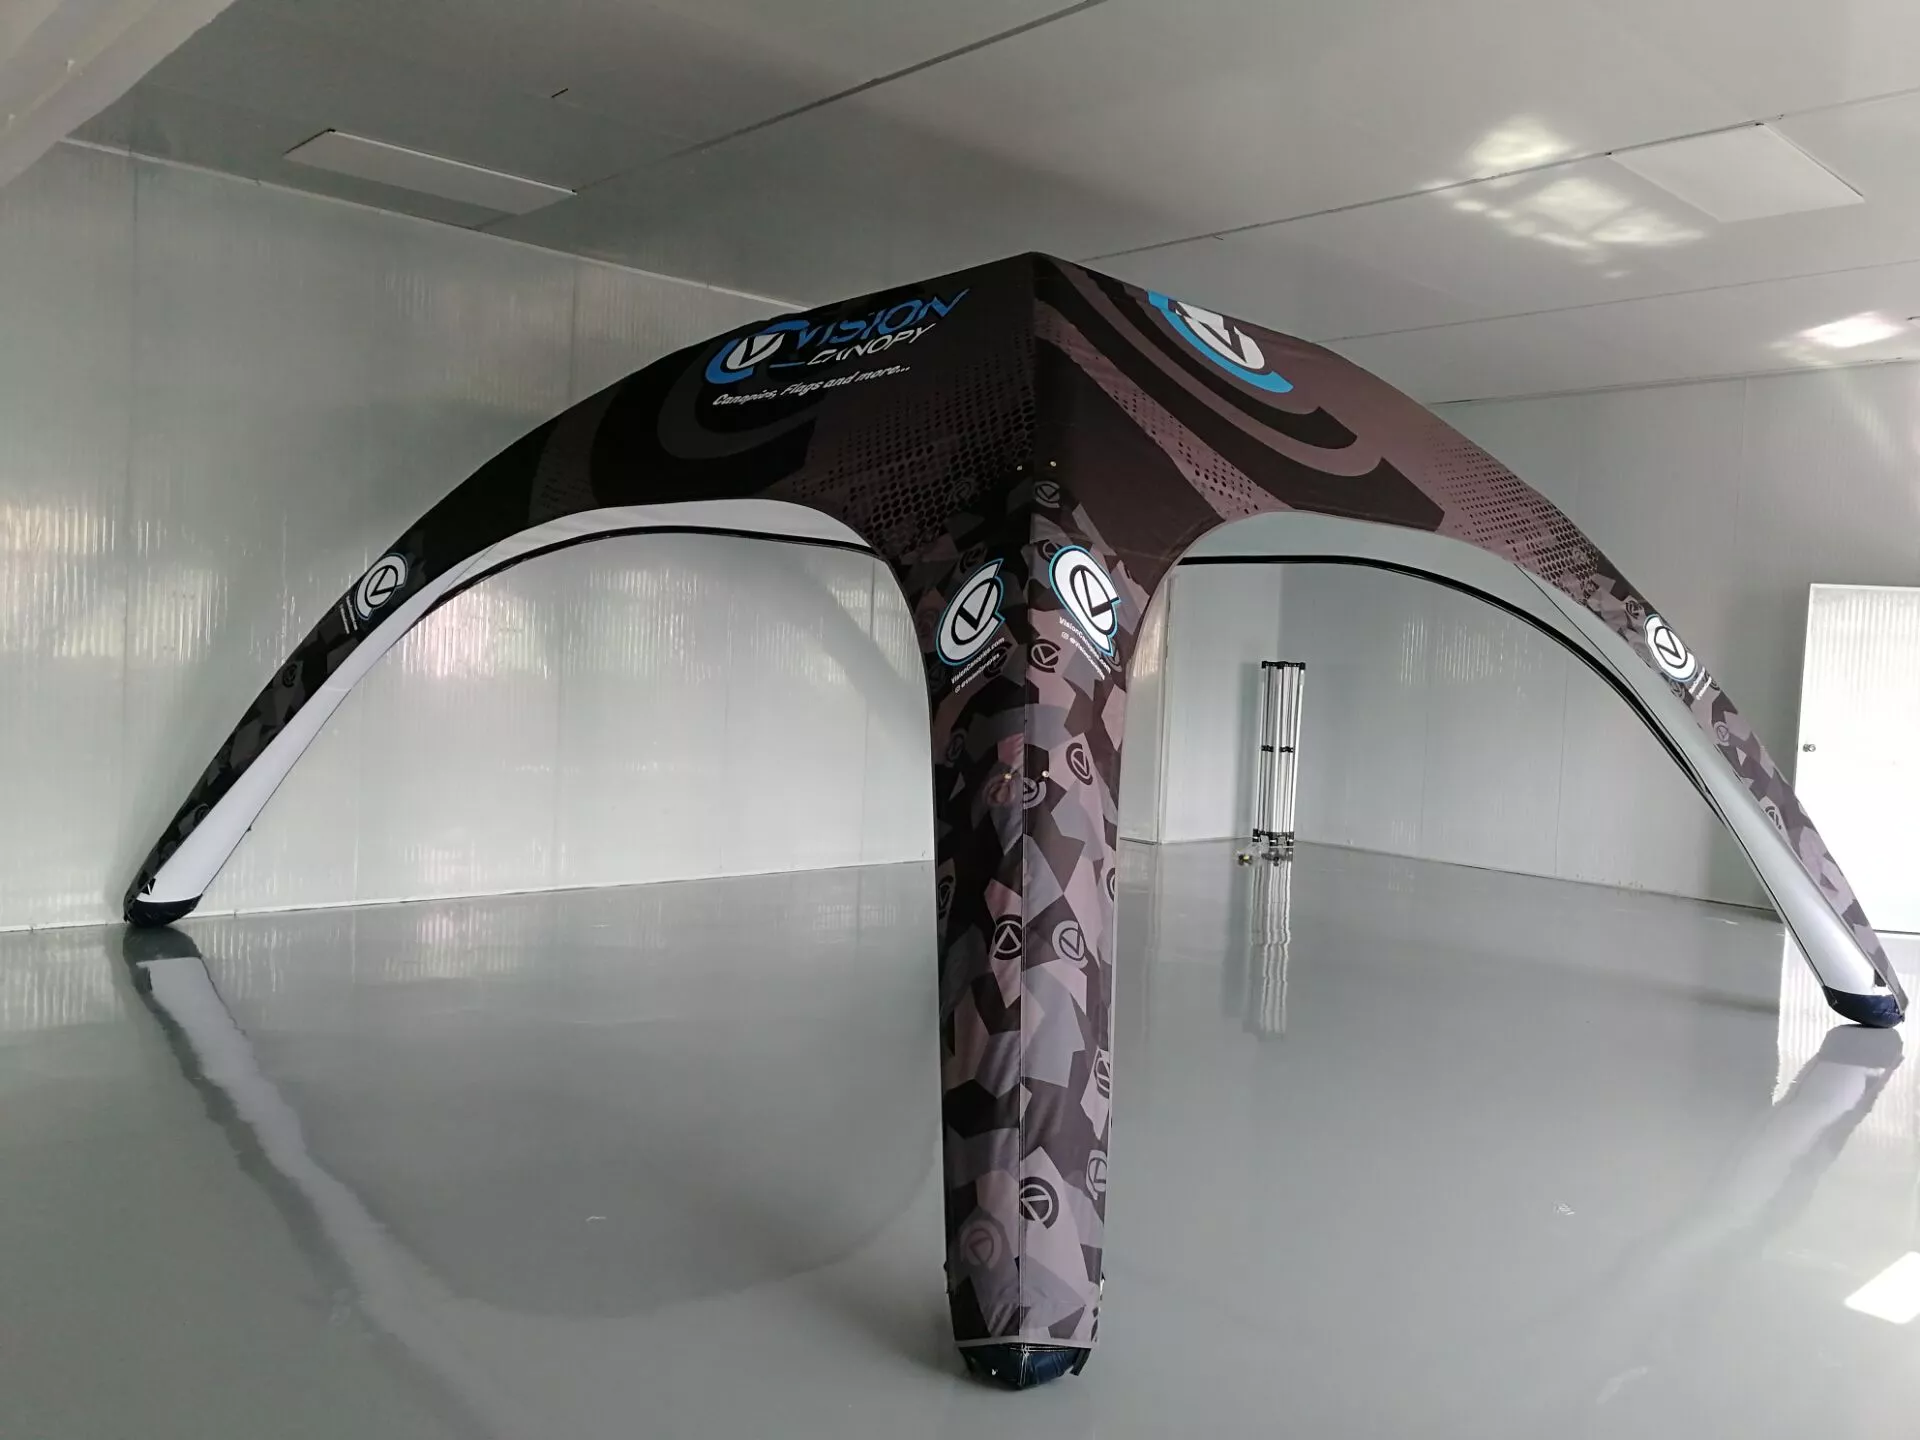 Inflatable Canopy Is A Frame Blow Up Tent